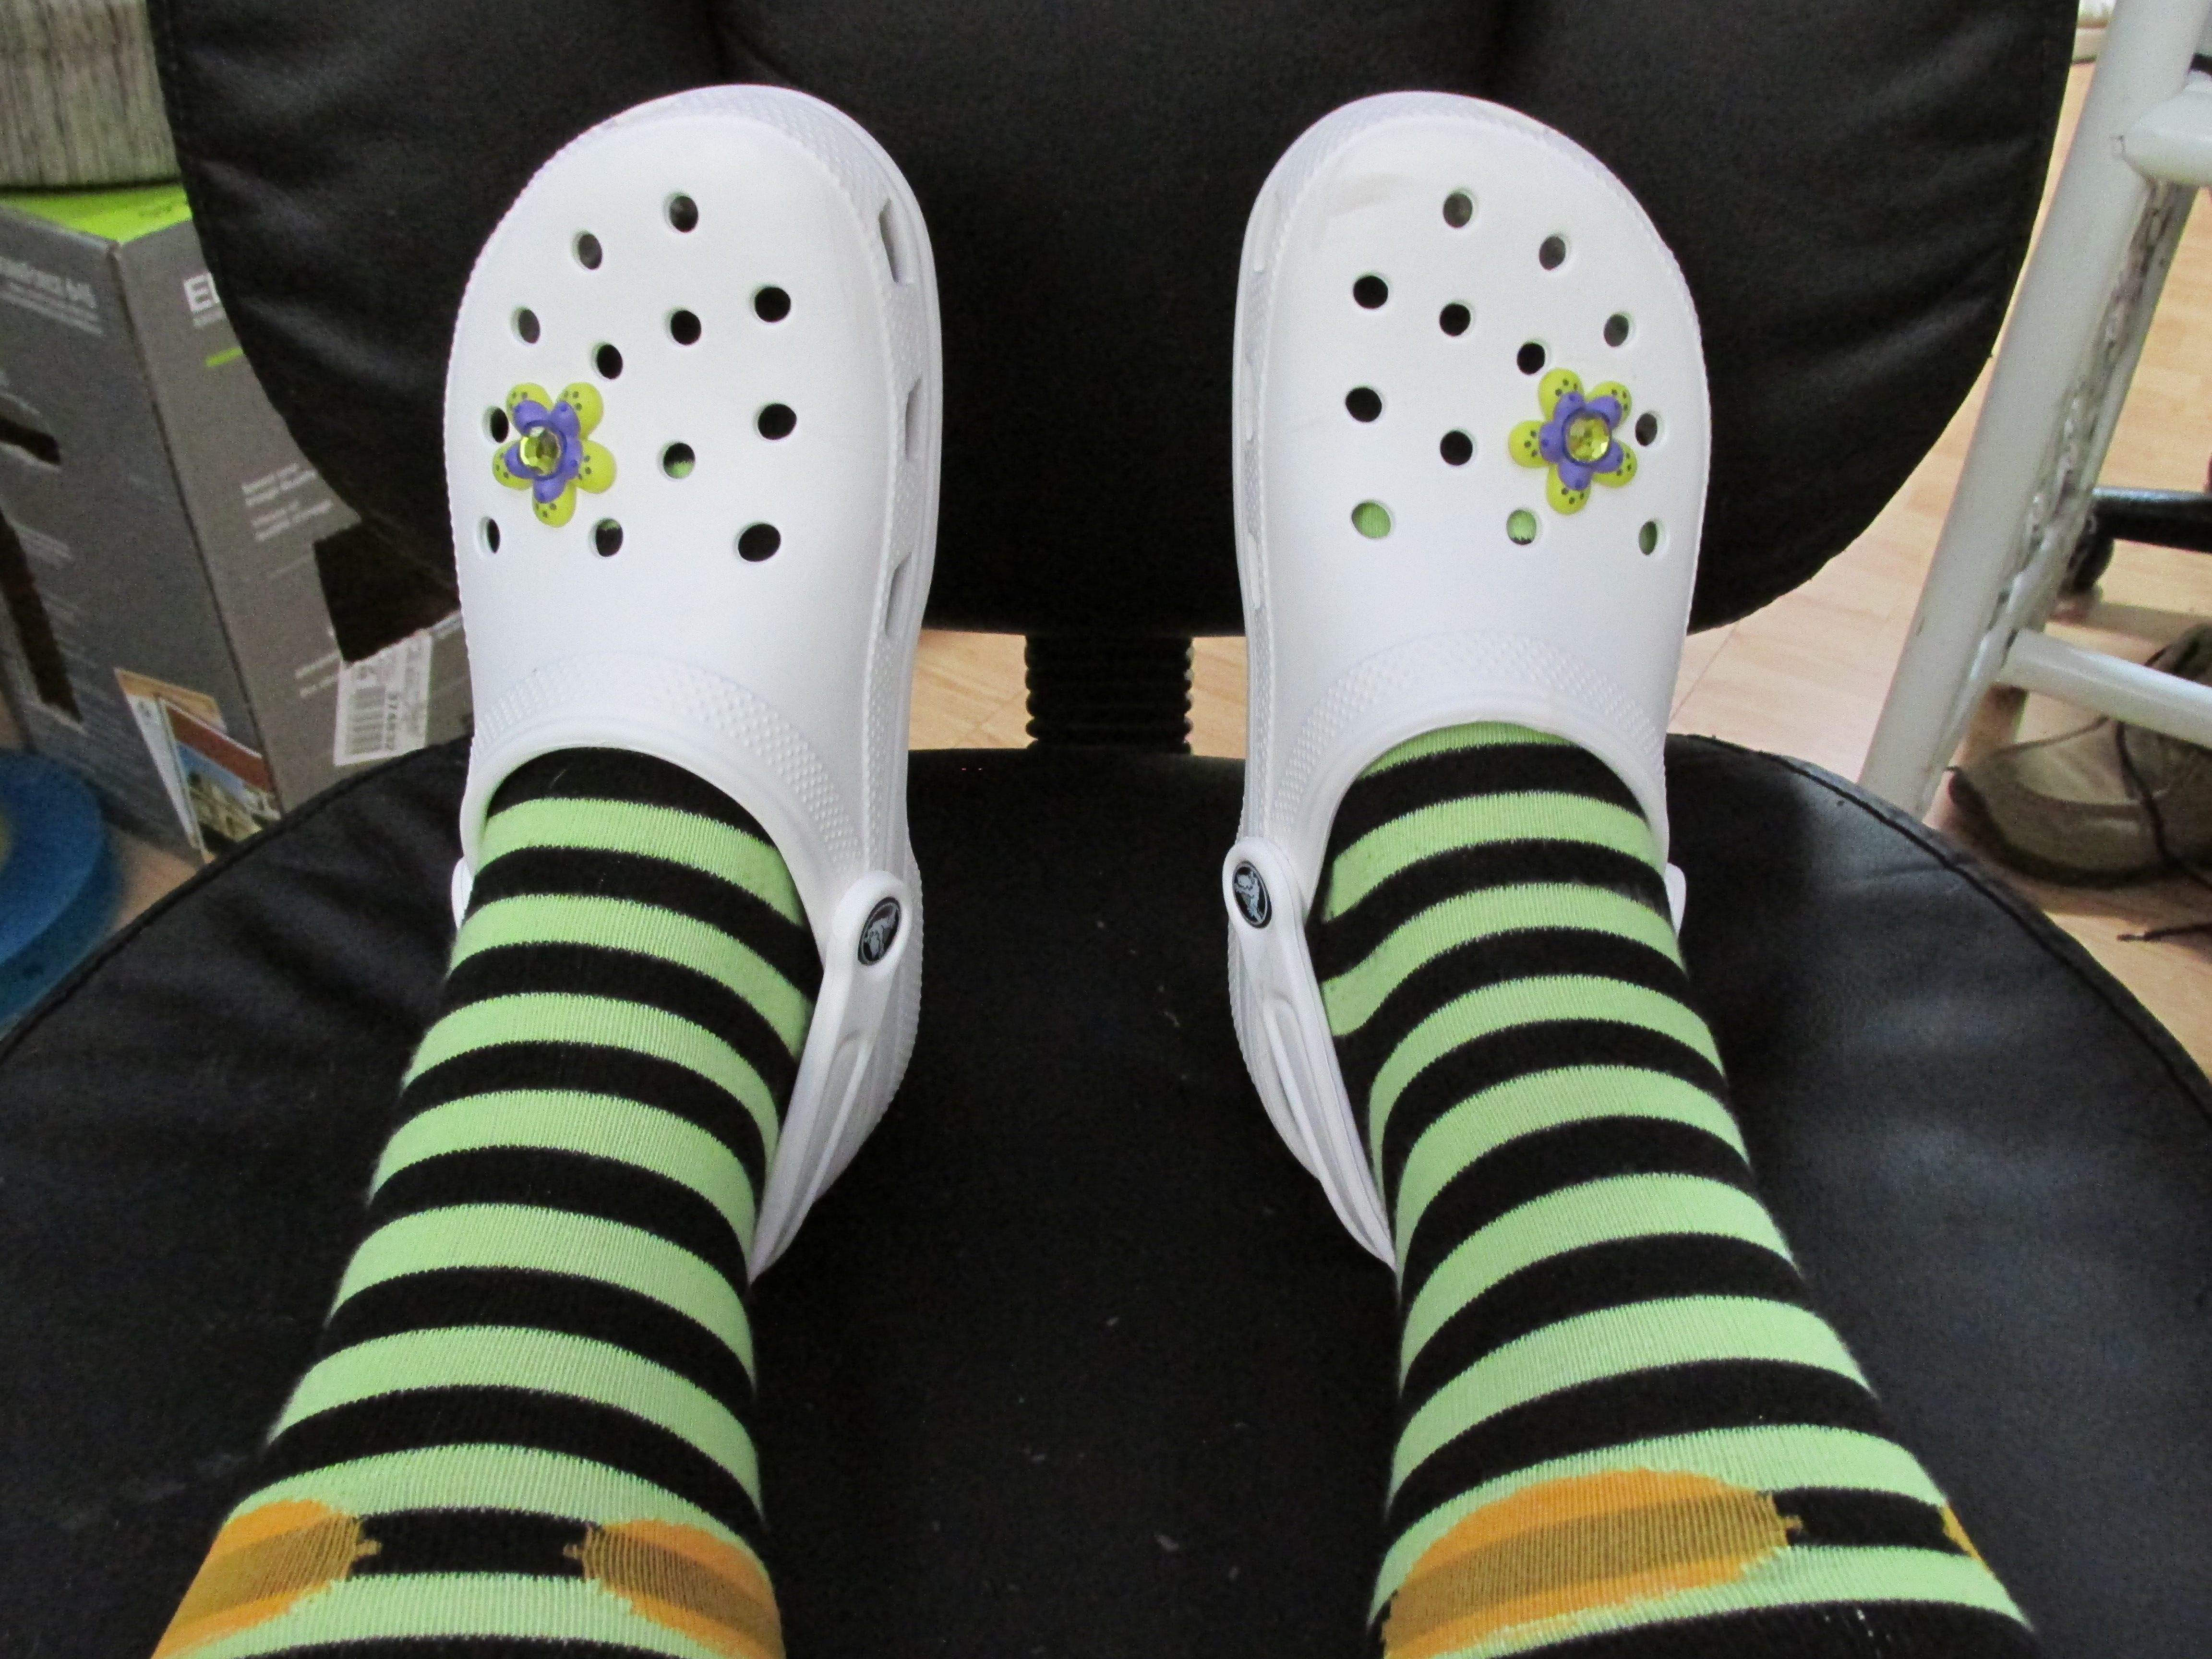 go balls out and totally rock our crocs and socks